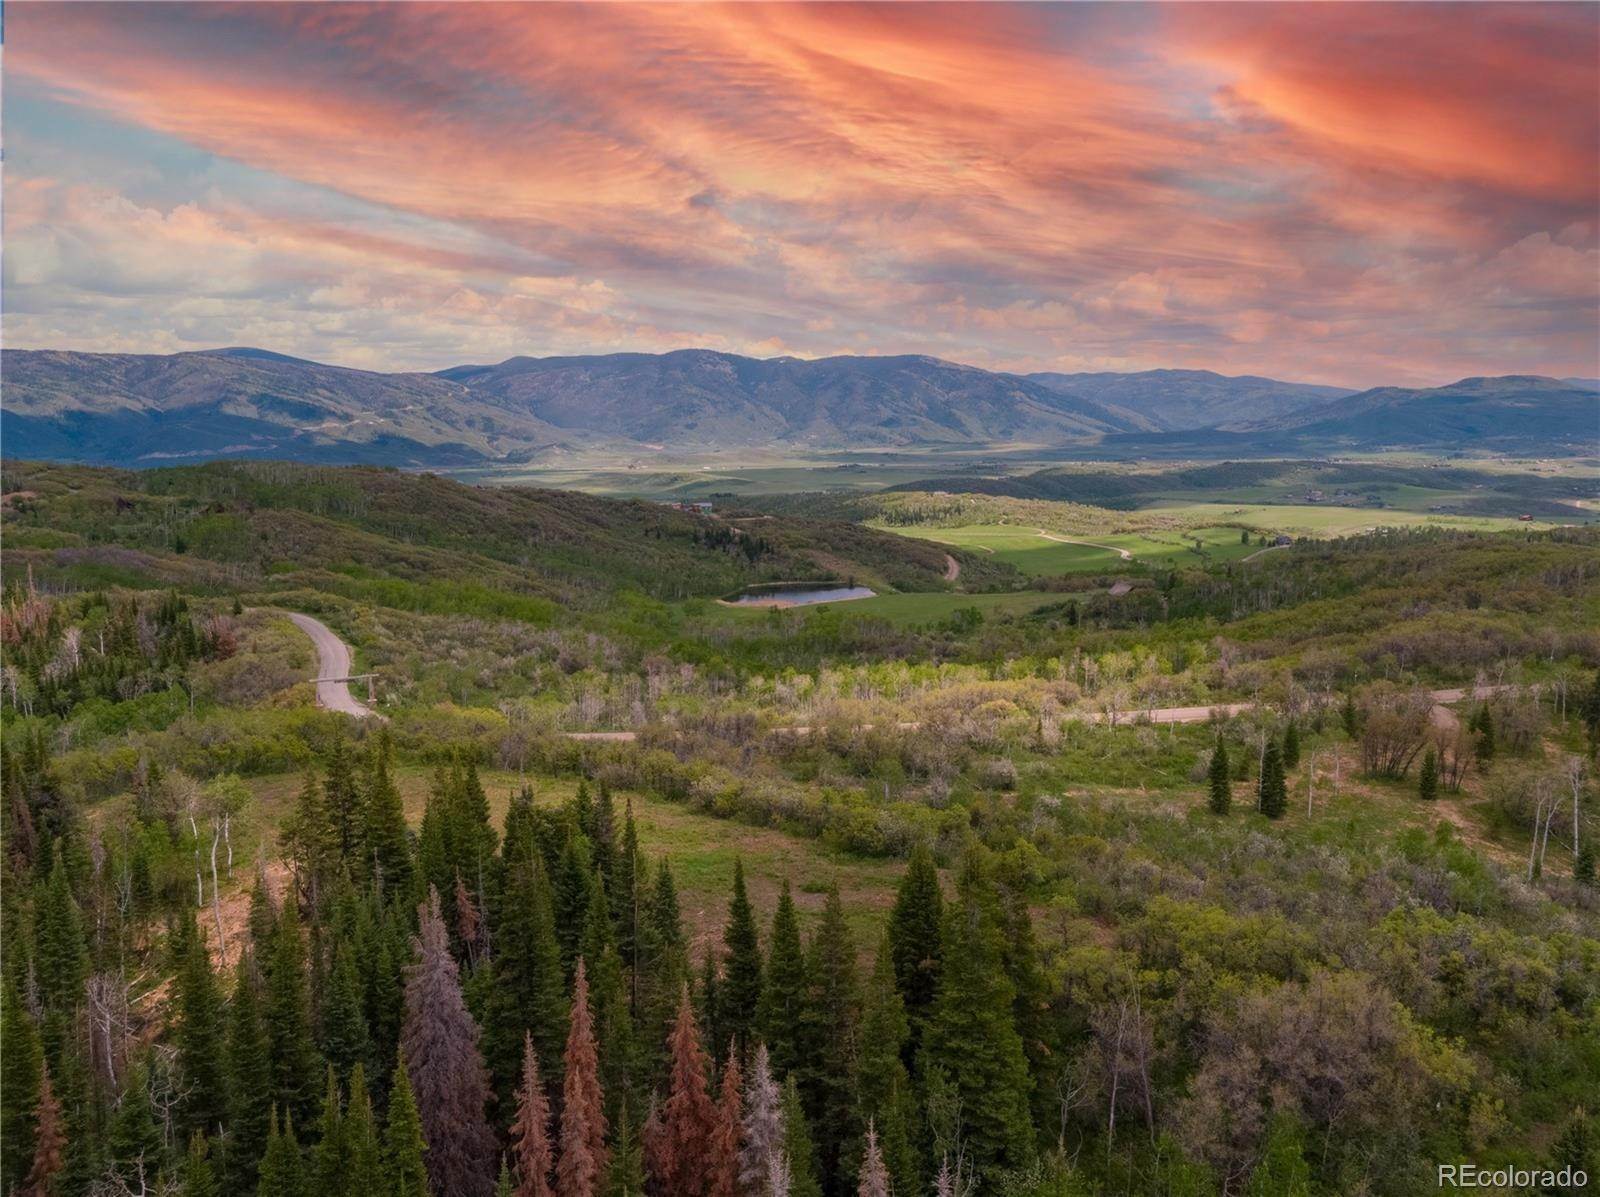 Property for Sale at County Road 41, Steamboat Springs, CO, 80487 County Road 41 Steamboat Springs, Colorado 80487 United States